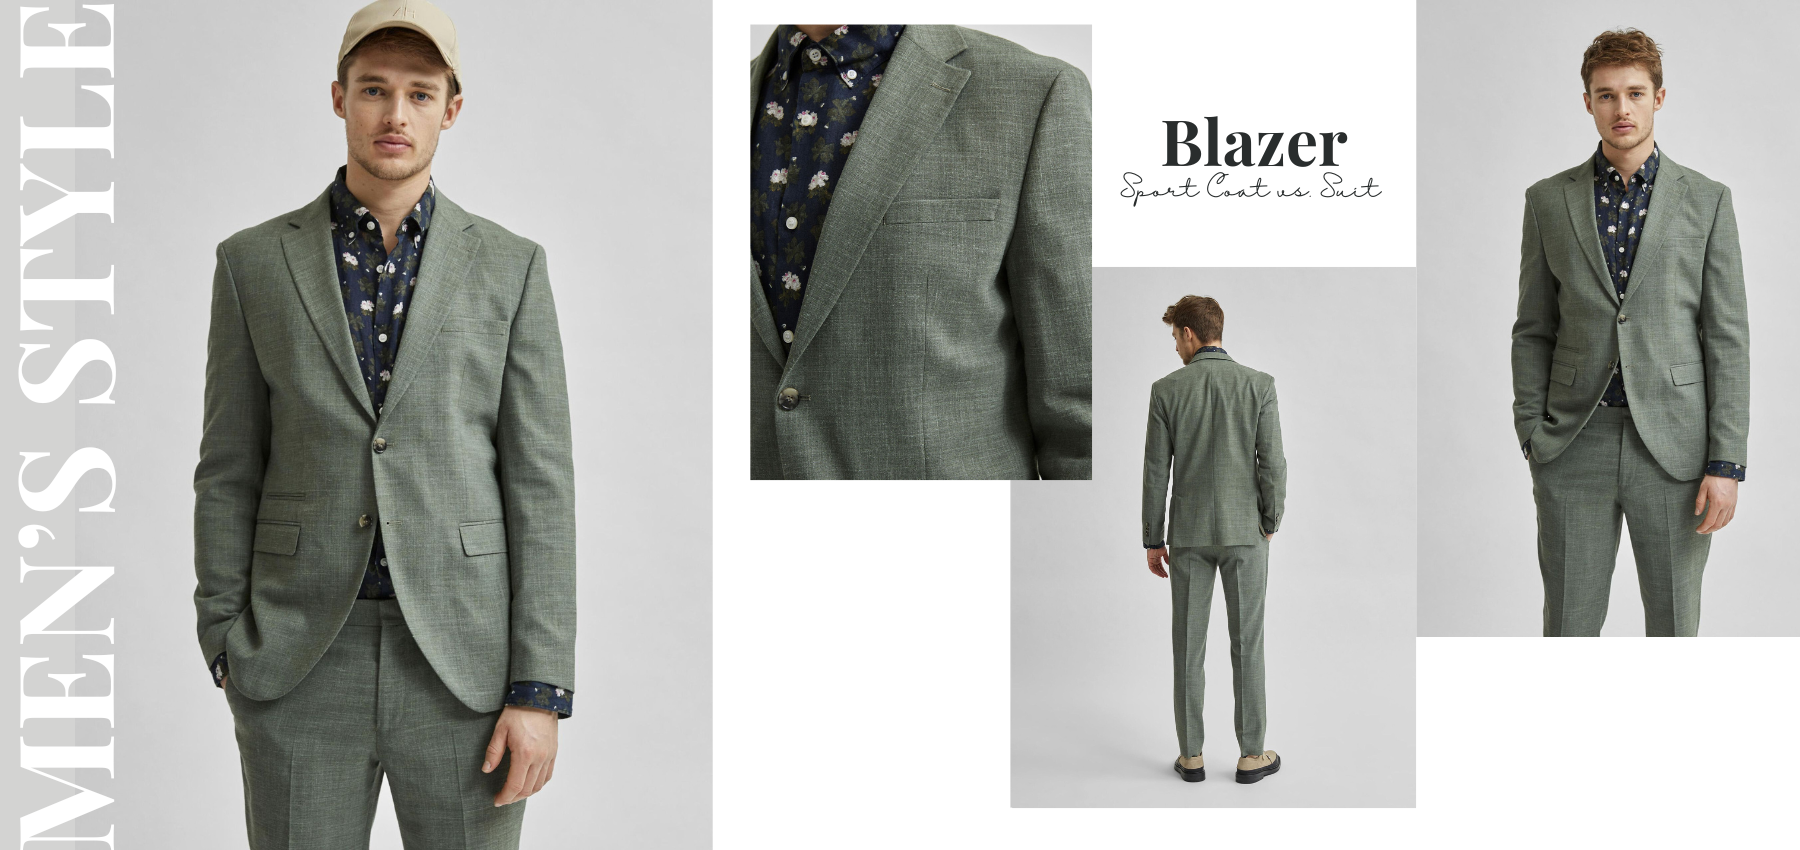 How are Blazers, Sport Coats, and Suit Jackets Different?